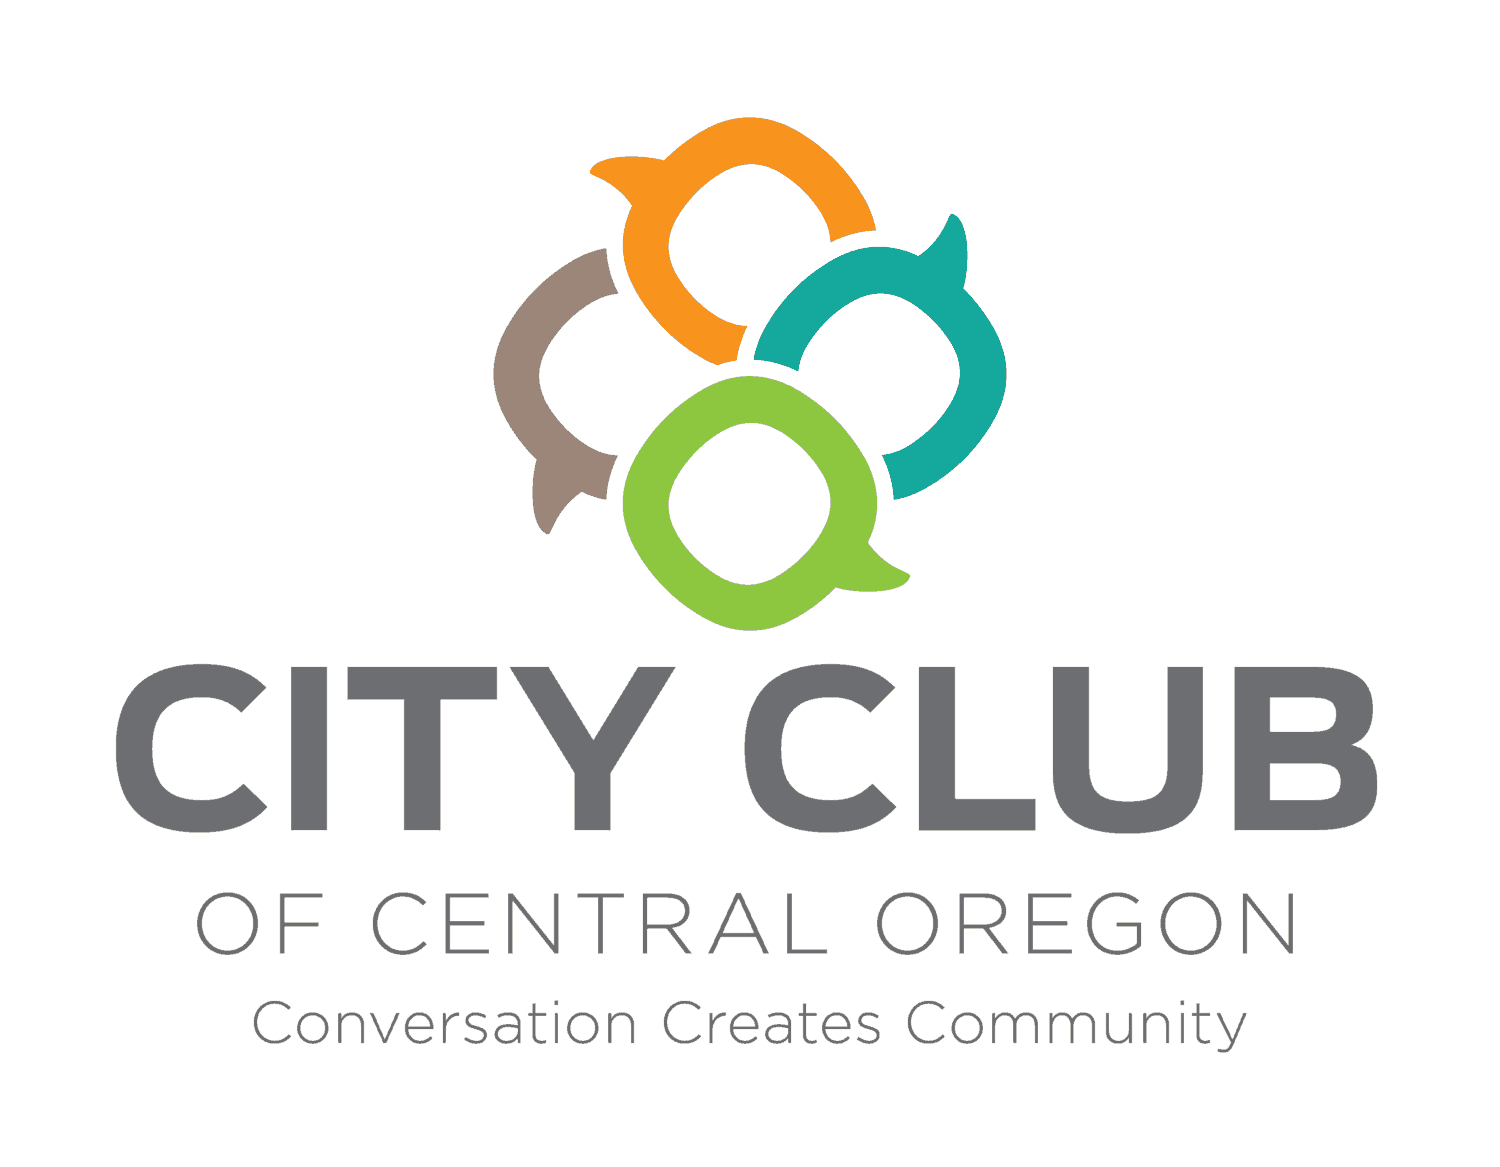 Oregon's Logo - City Club of Central Oregon's New Logo Signifies Growth – City Club ...